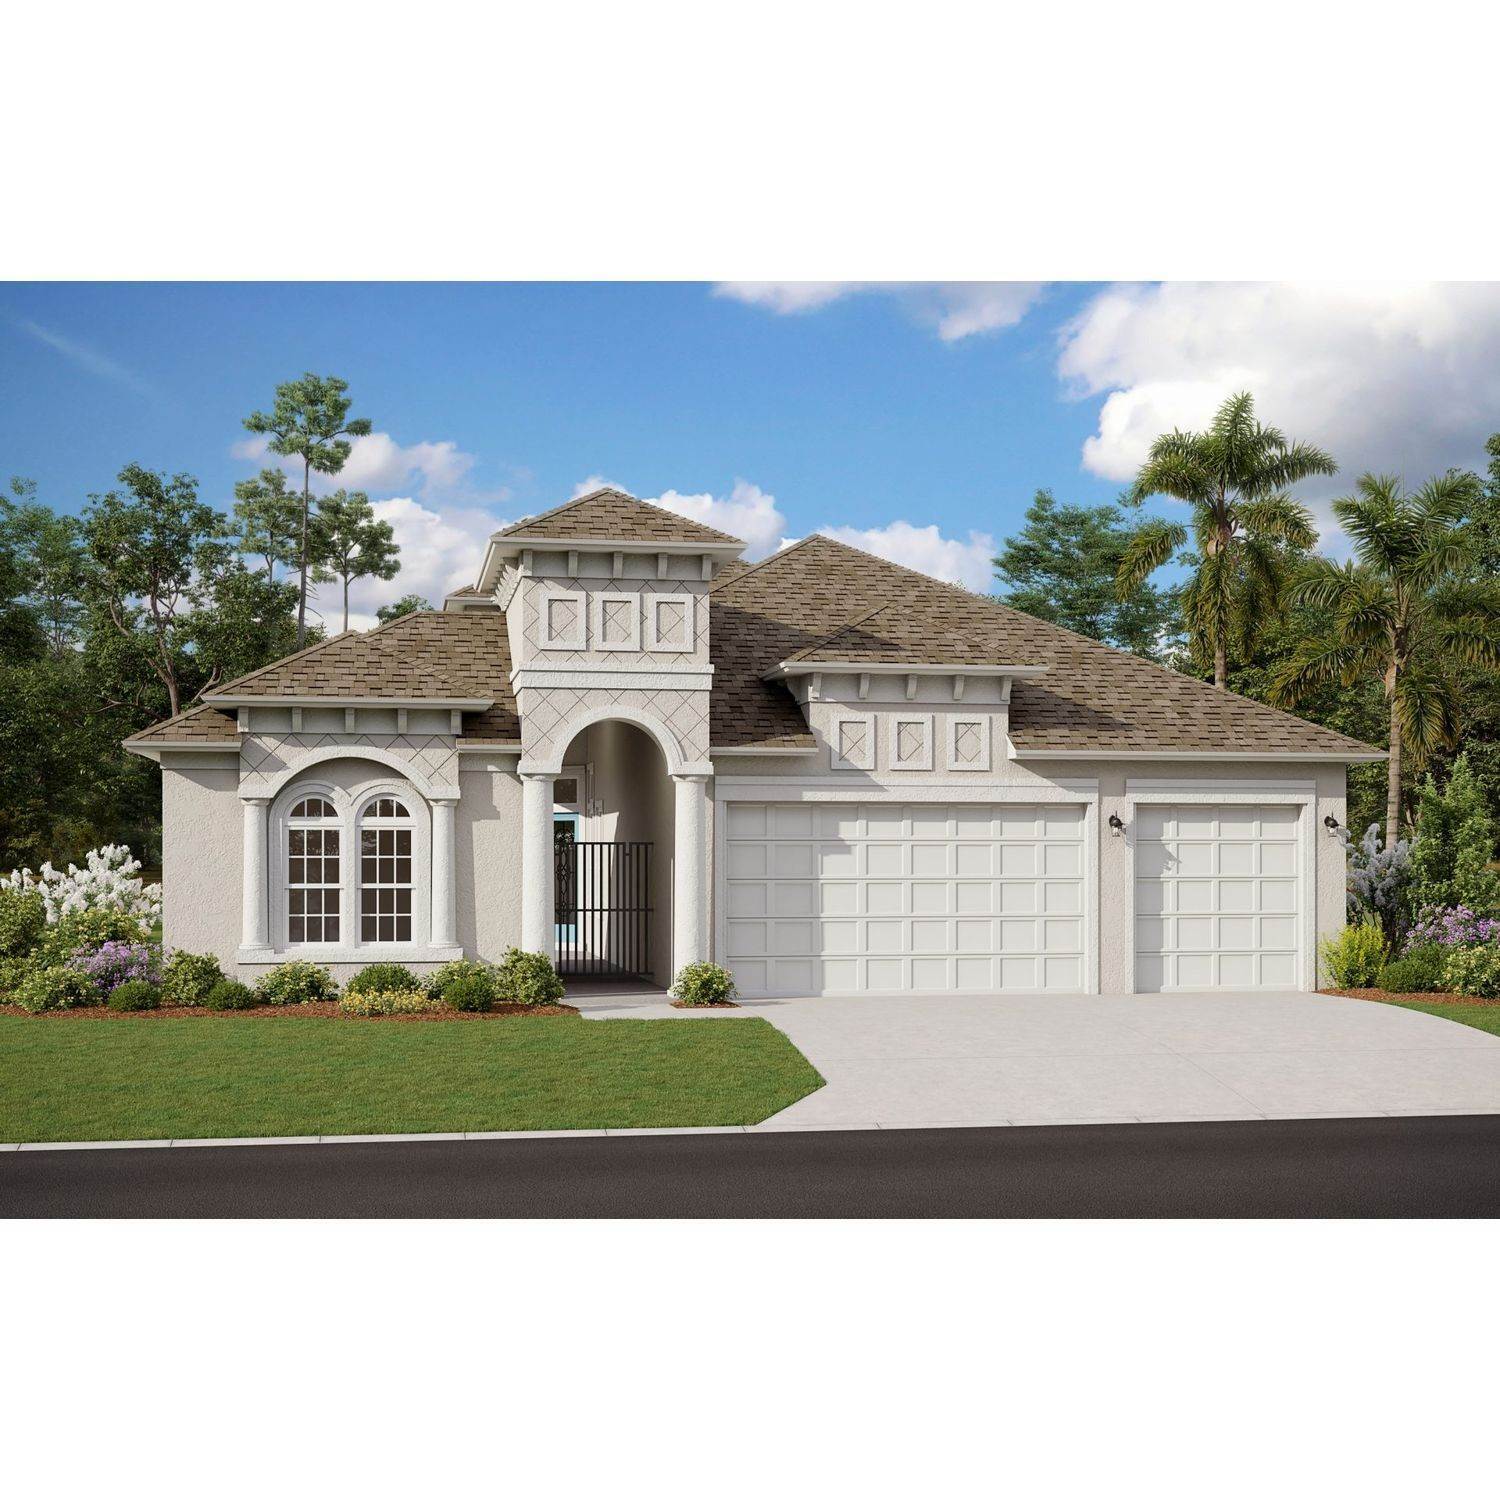 Single Family for Sale at Beachwalk - Las Palmas Ii Single Family: 57 Topside Drive / Attached Villas: 117 Rum Runner Way ST. JOHNS, FLORIDA 32259 UNITED STATES